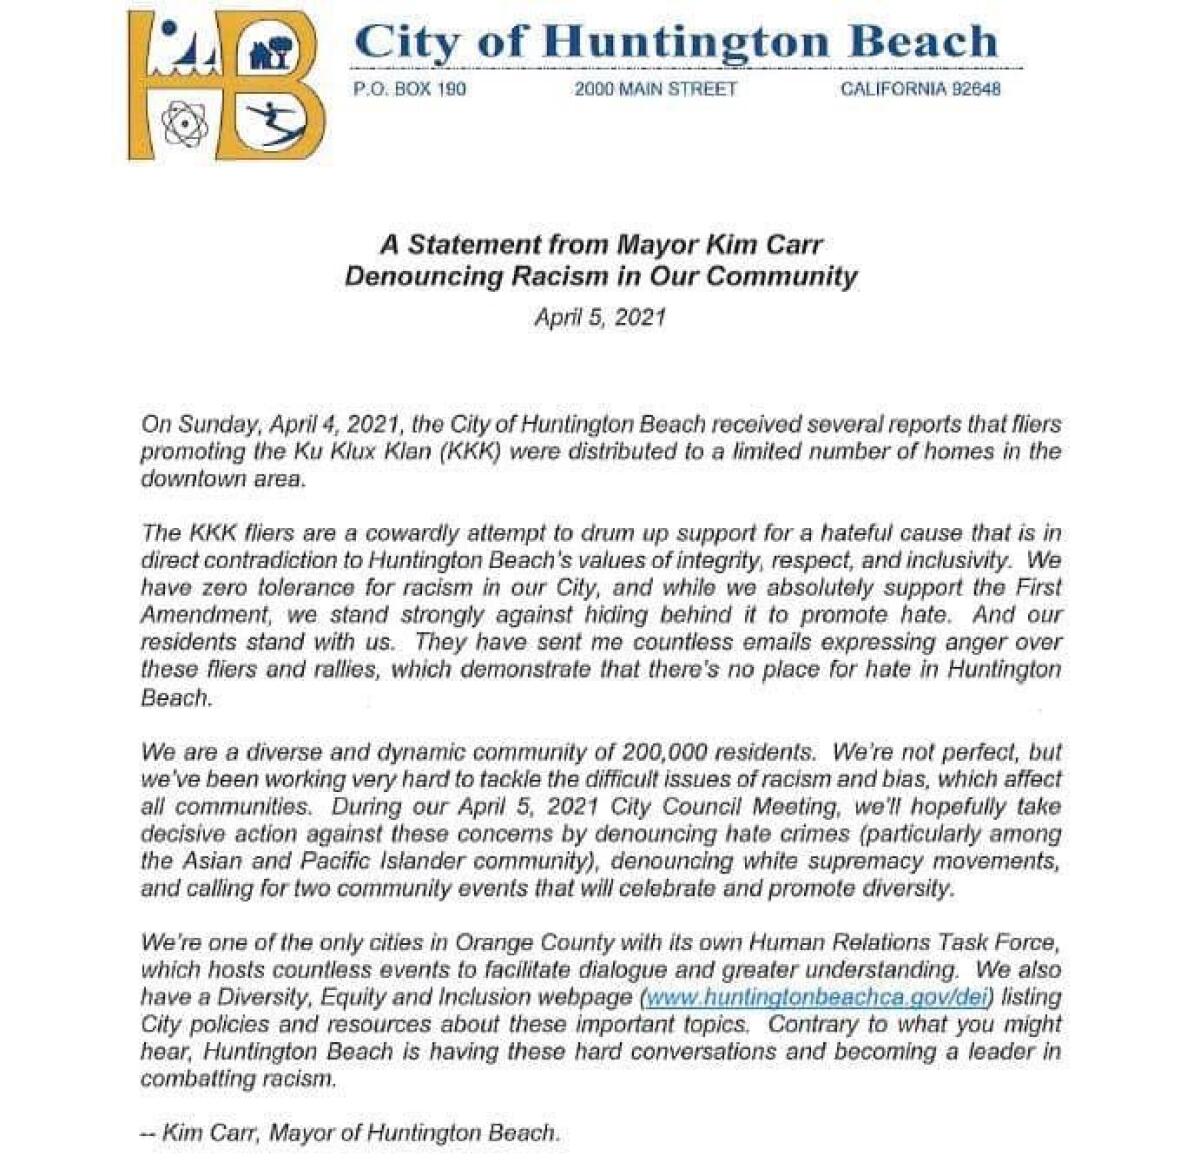 Mayor Kim Carr released a statement Monday denouncing the KKK fliers that were found in downtown area Huntington Beach.